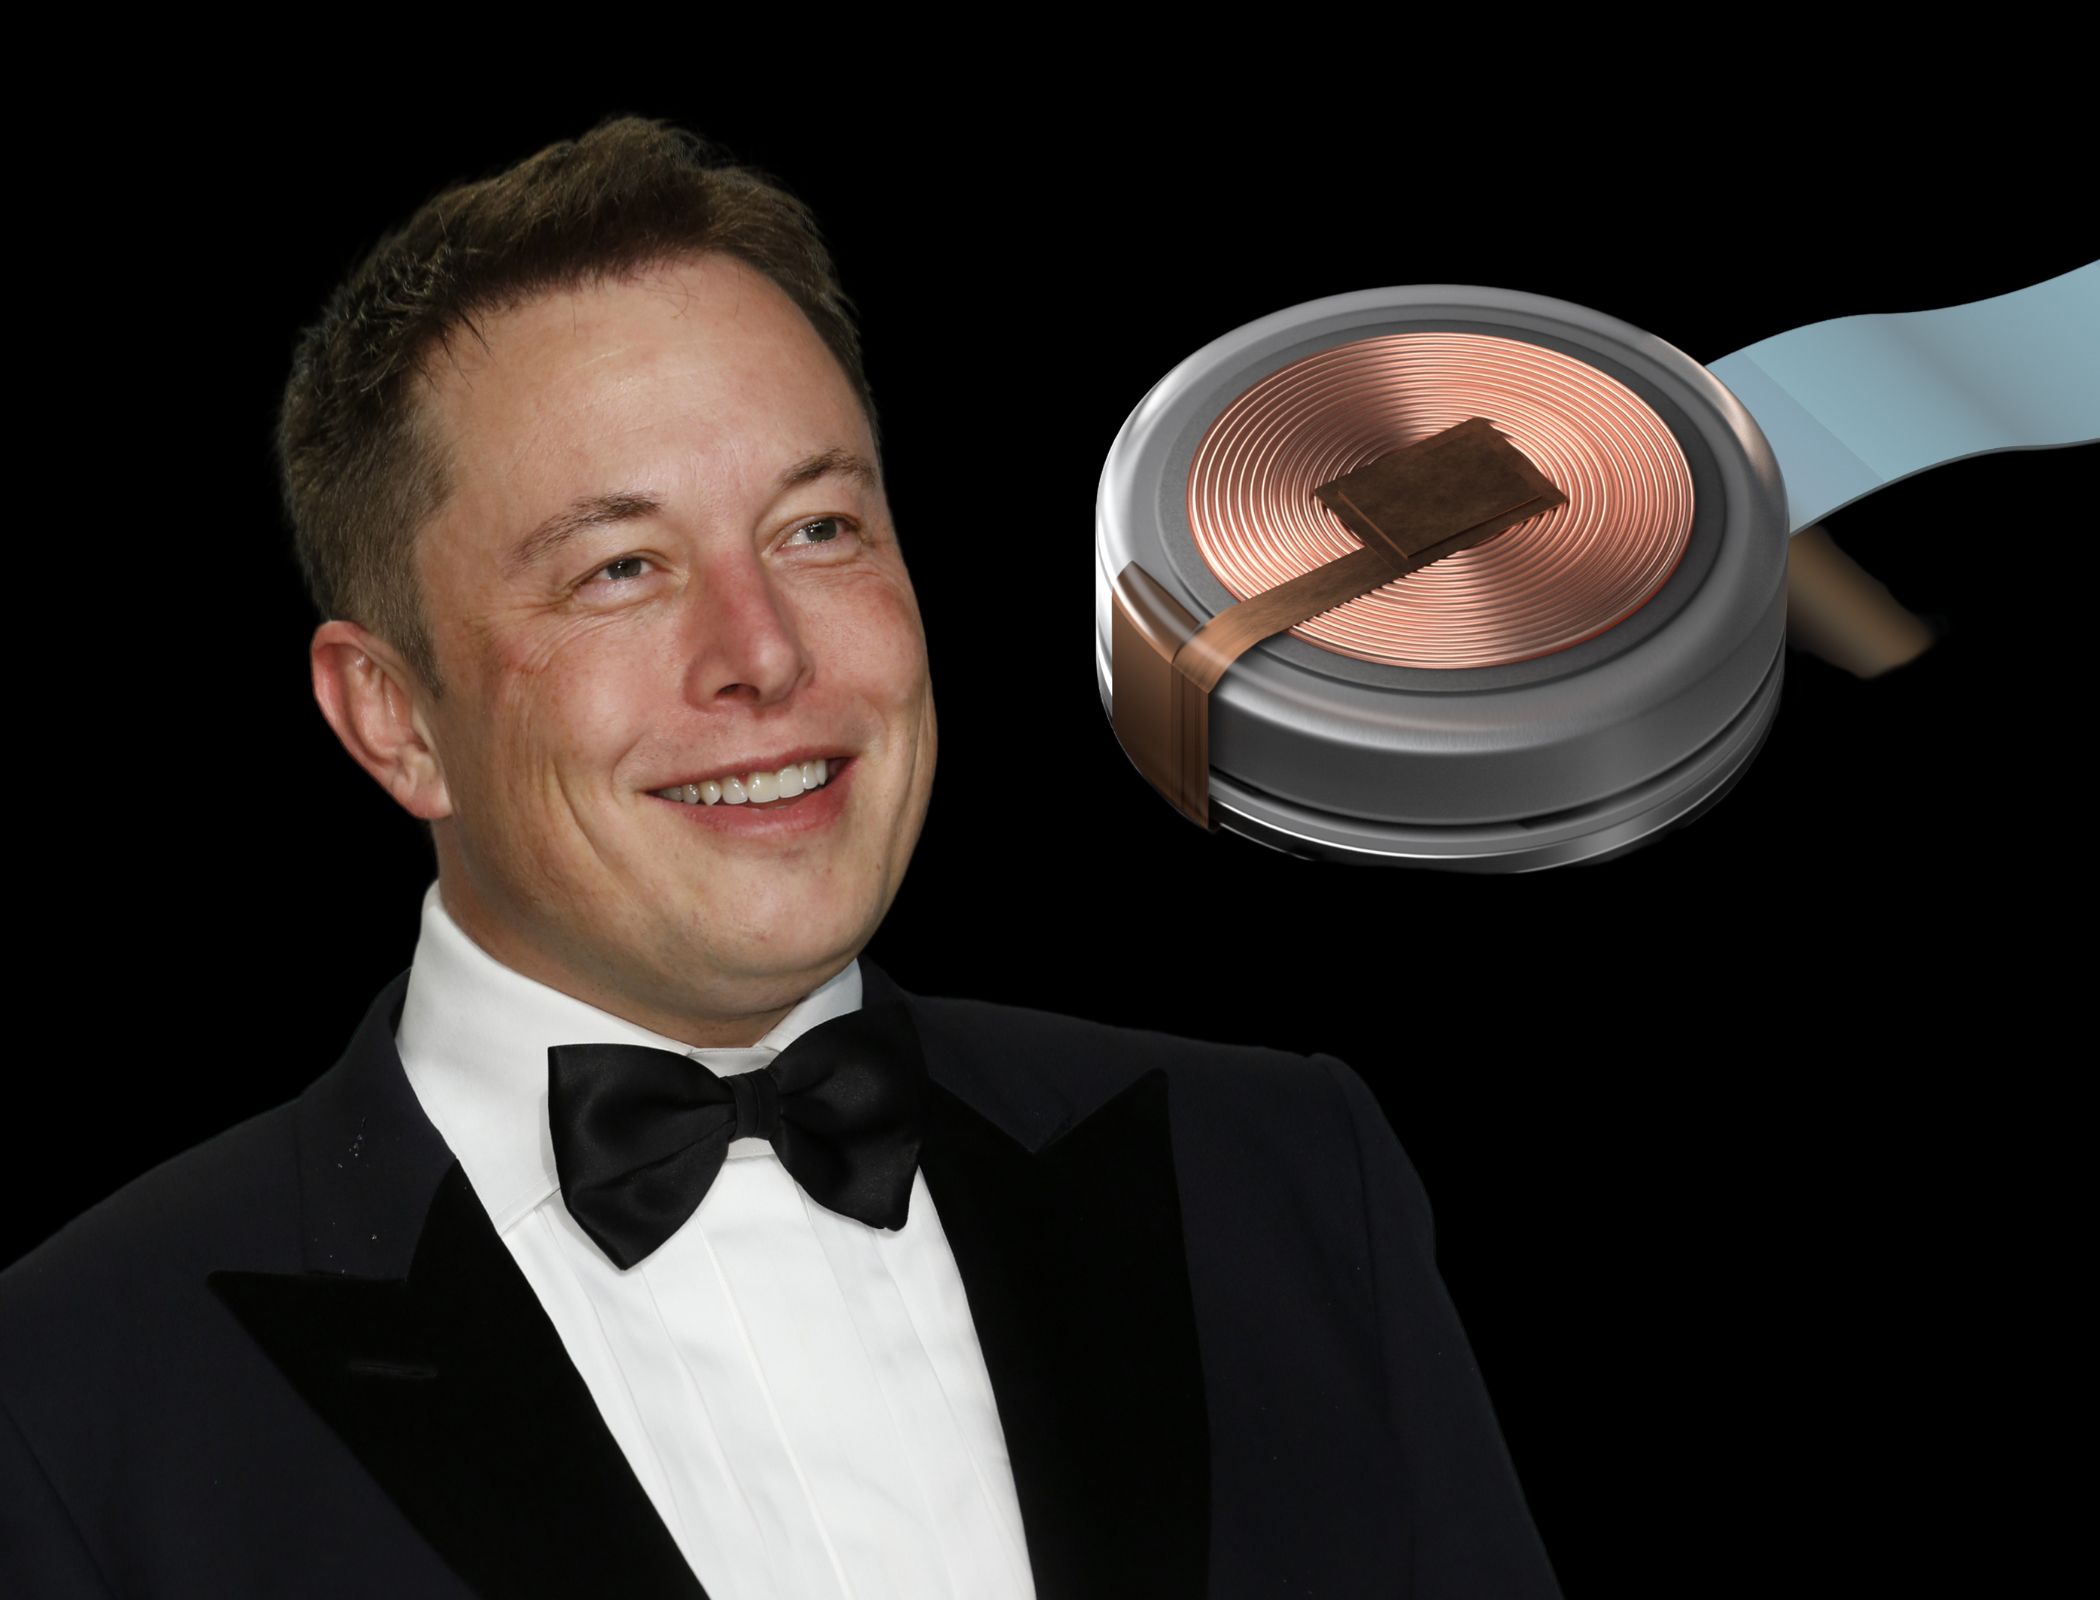 Musk’s brain-chip Neuralink company approved for human trials